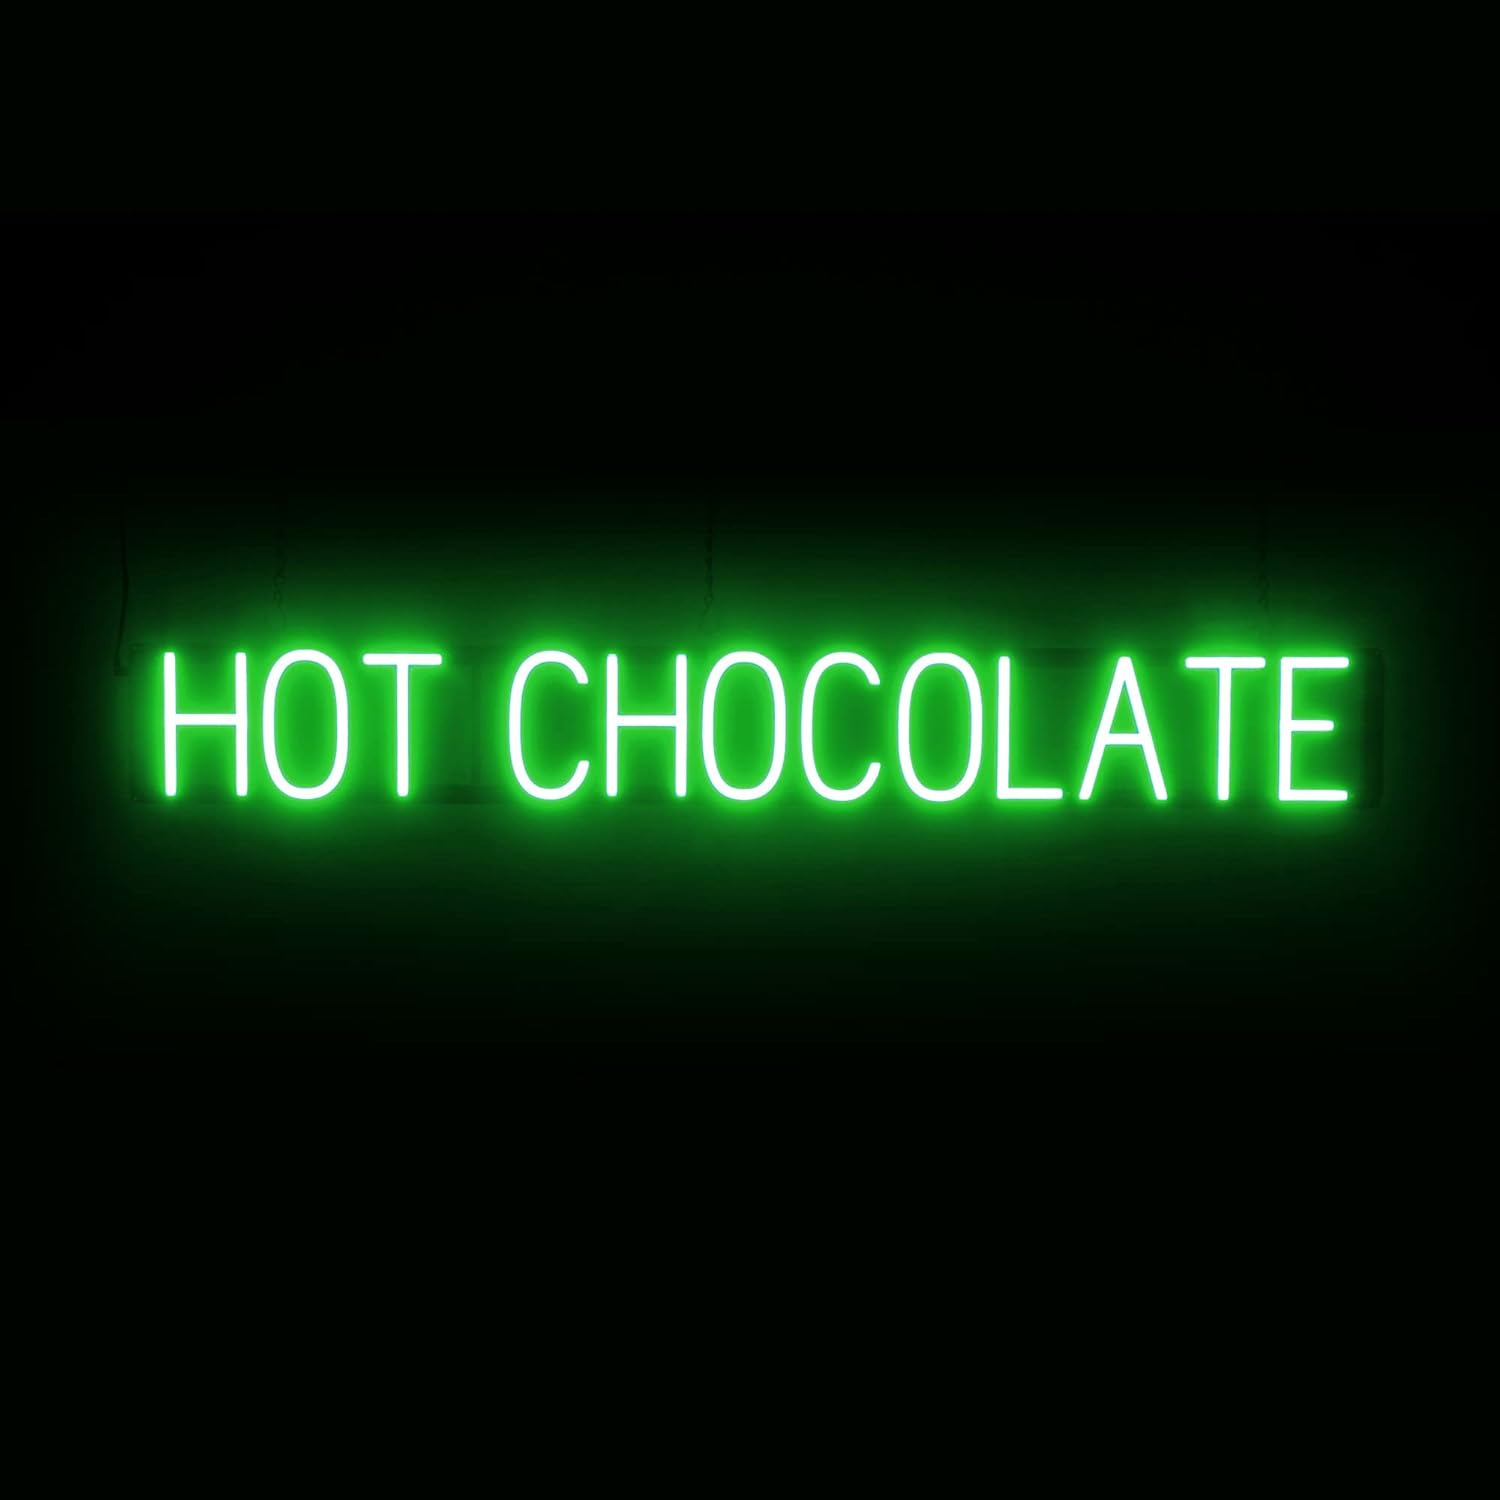 HOT CHOCOLATE Neon-Led Sign for Cafes. 48.8\